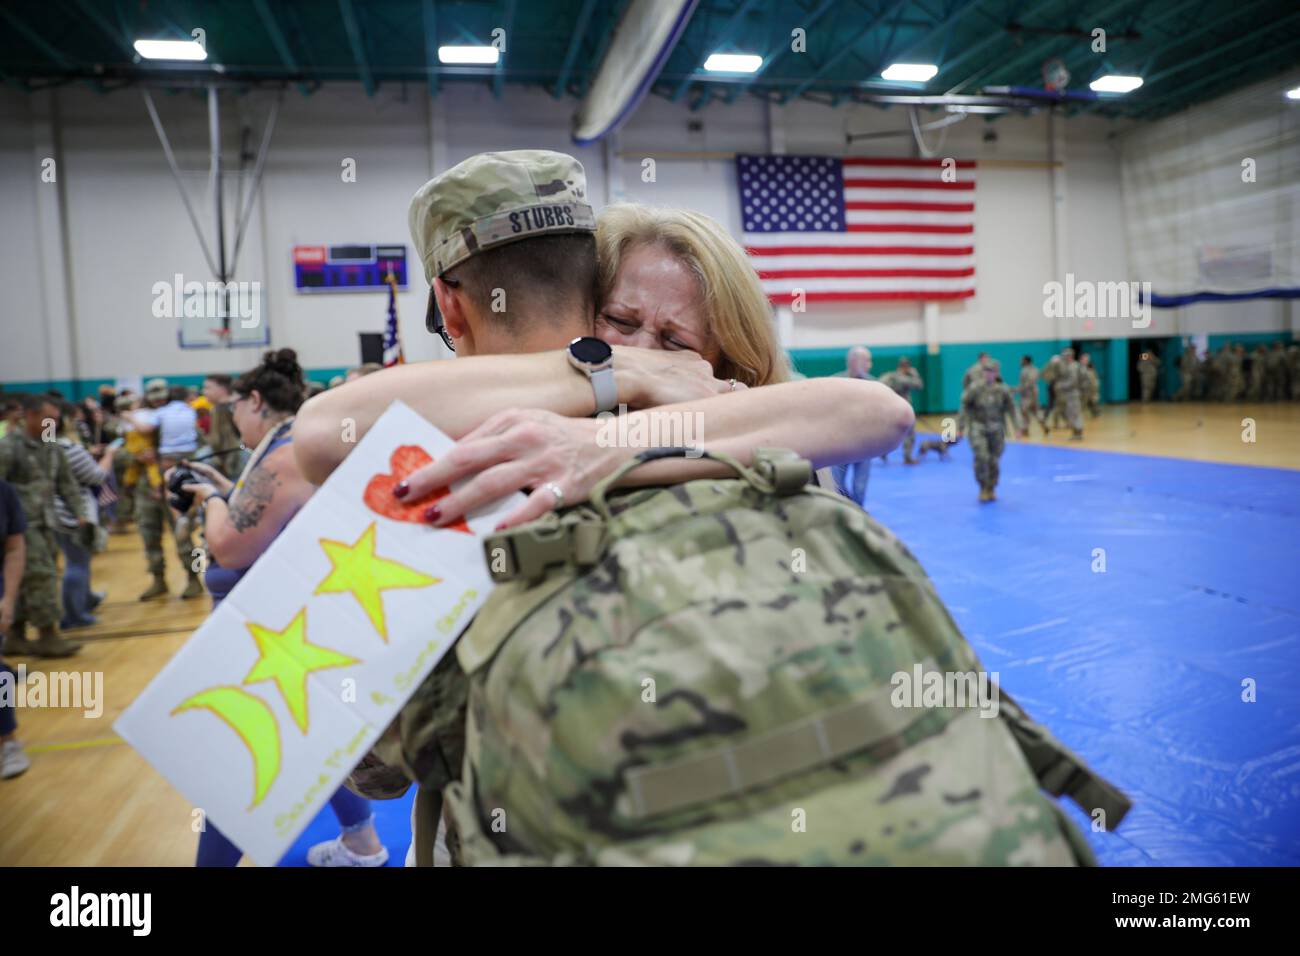 U.S. Army Cpl. John Stubbs, a human intelligence collector assigned to the 10th Brigade Engineer Battalion, 1st Armored Brigade Combat Team, 3rd Infantry Division, and his mother, Laurel Stubbs, share a tearful embrace during a welcome home ceremony at Fort Stewart, Georgia, Aug. 22, 2022. The “Raider” Brigade is constantly deployment-ready to protect the core principles found in the United States Constitution against all enemies who may jeopardize those values, both foreign and domestic. Stock Photo